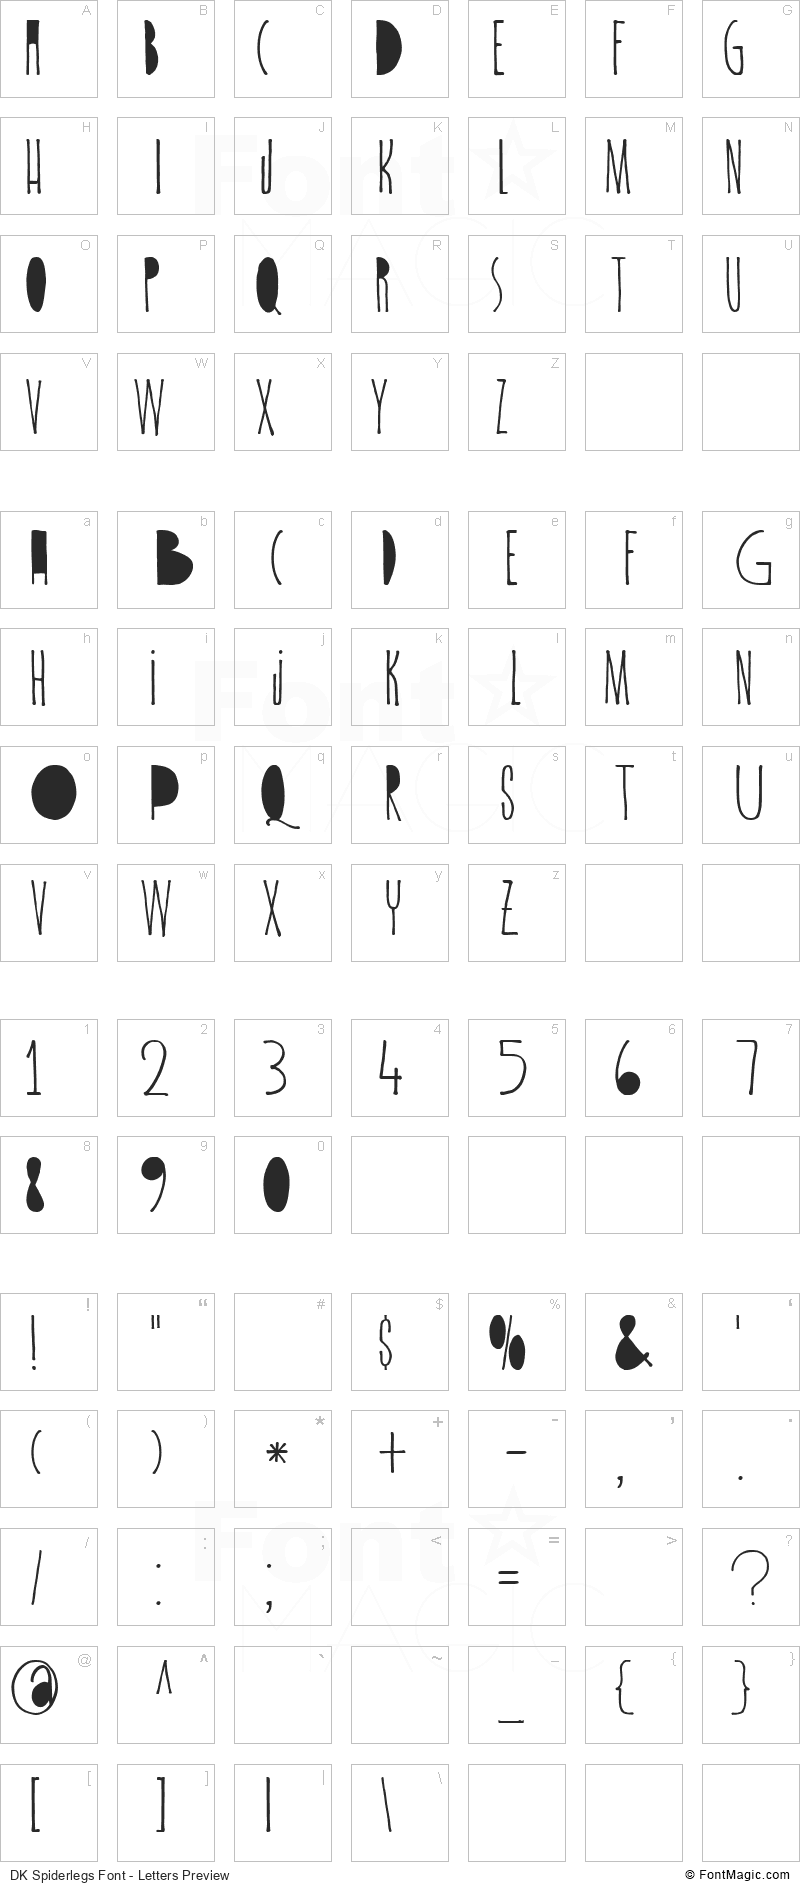 DK Spiderlegs Font - All Latters Preview Chart